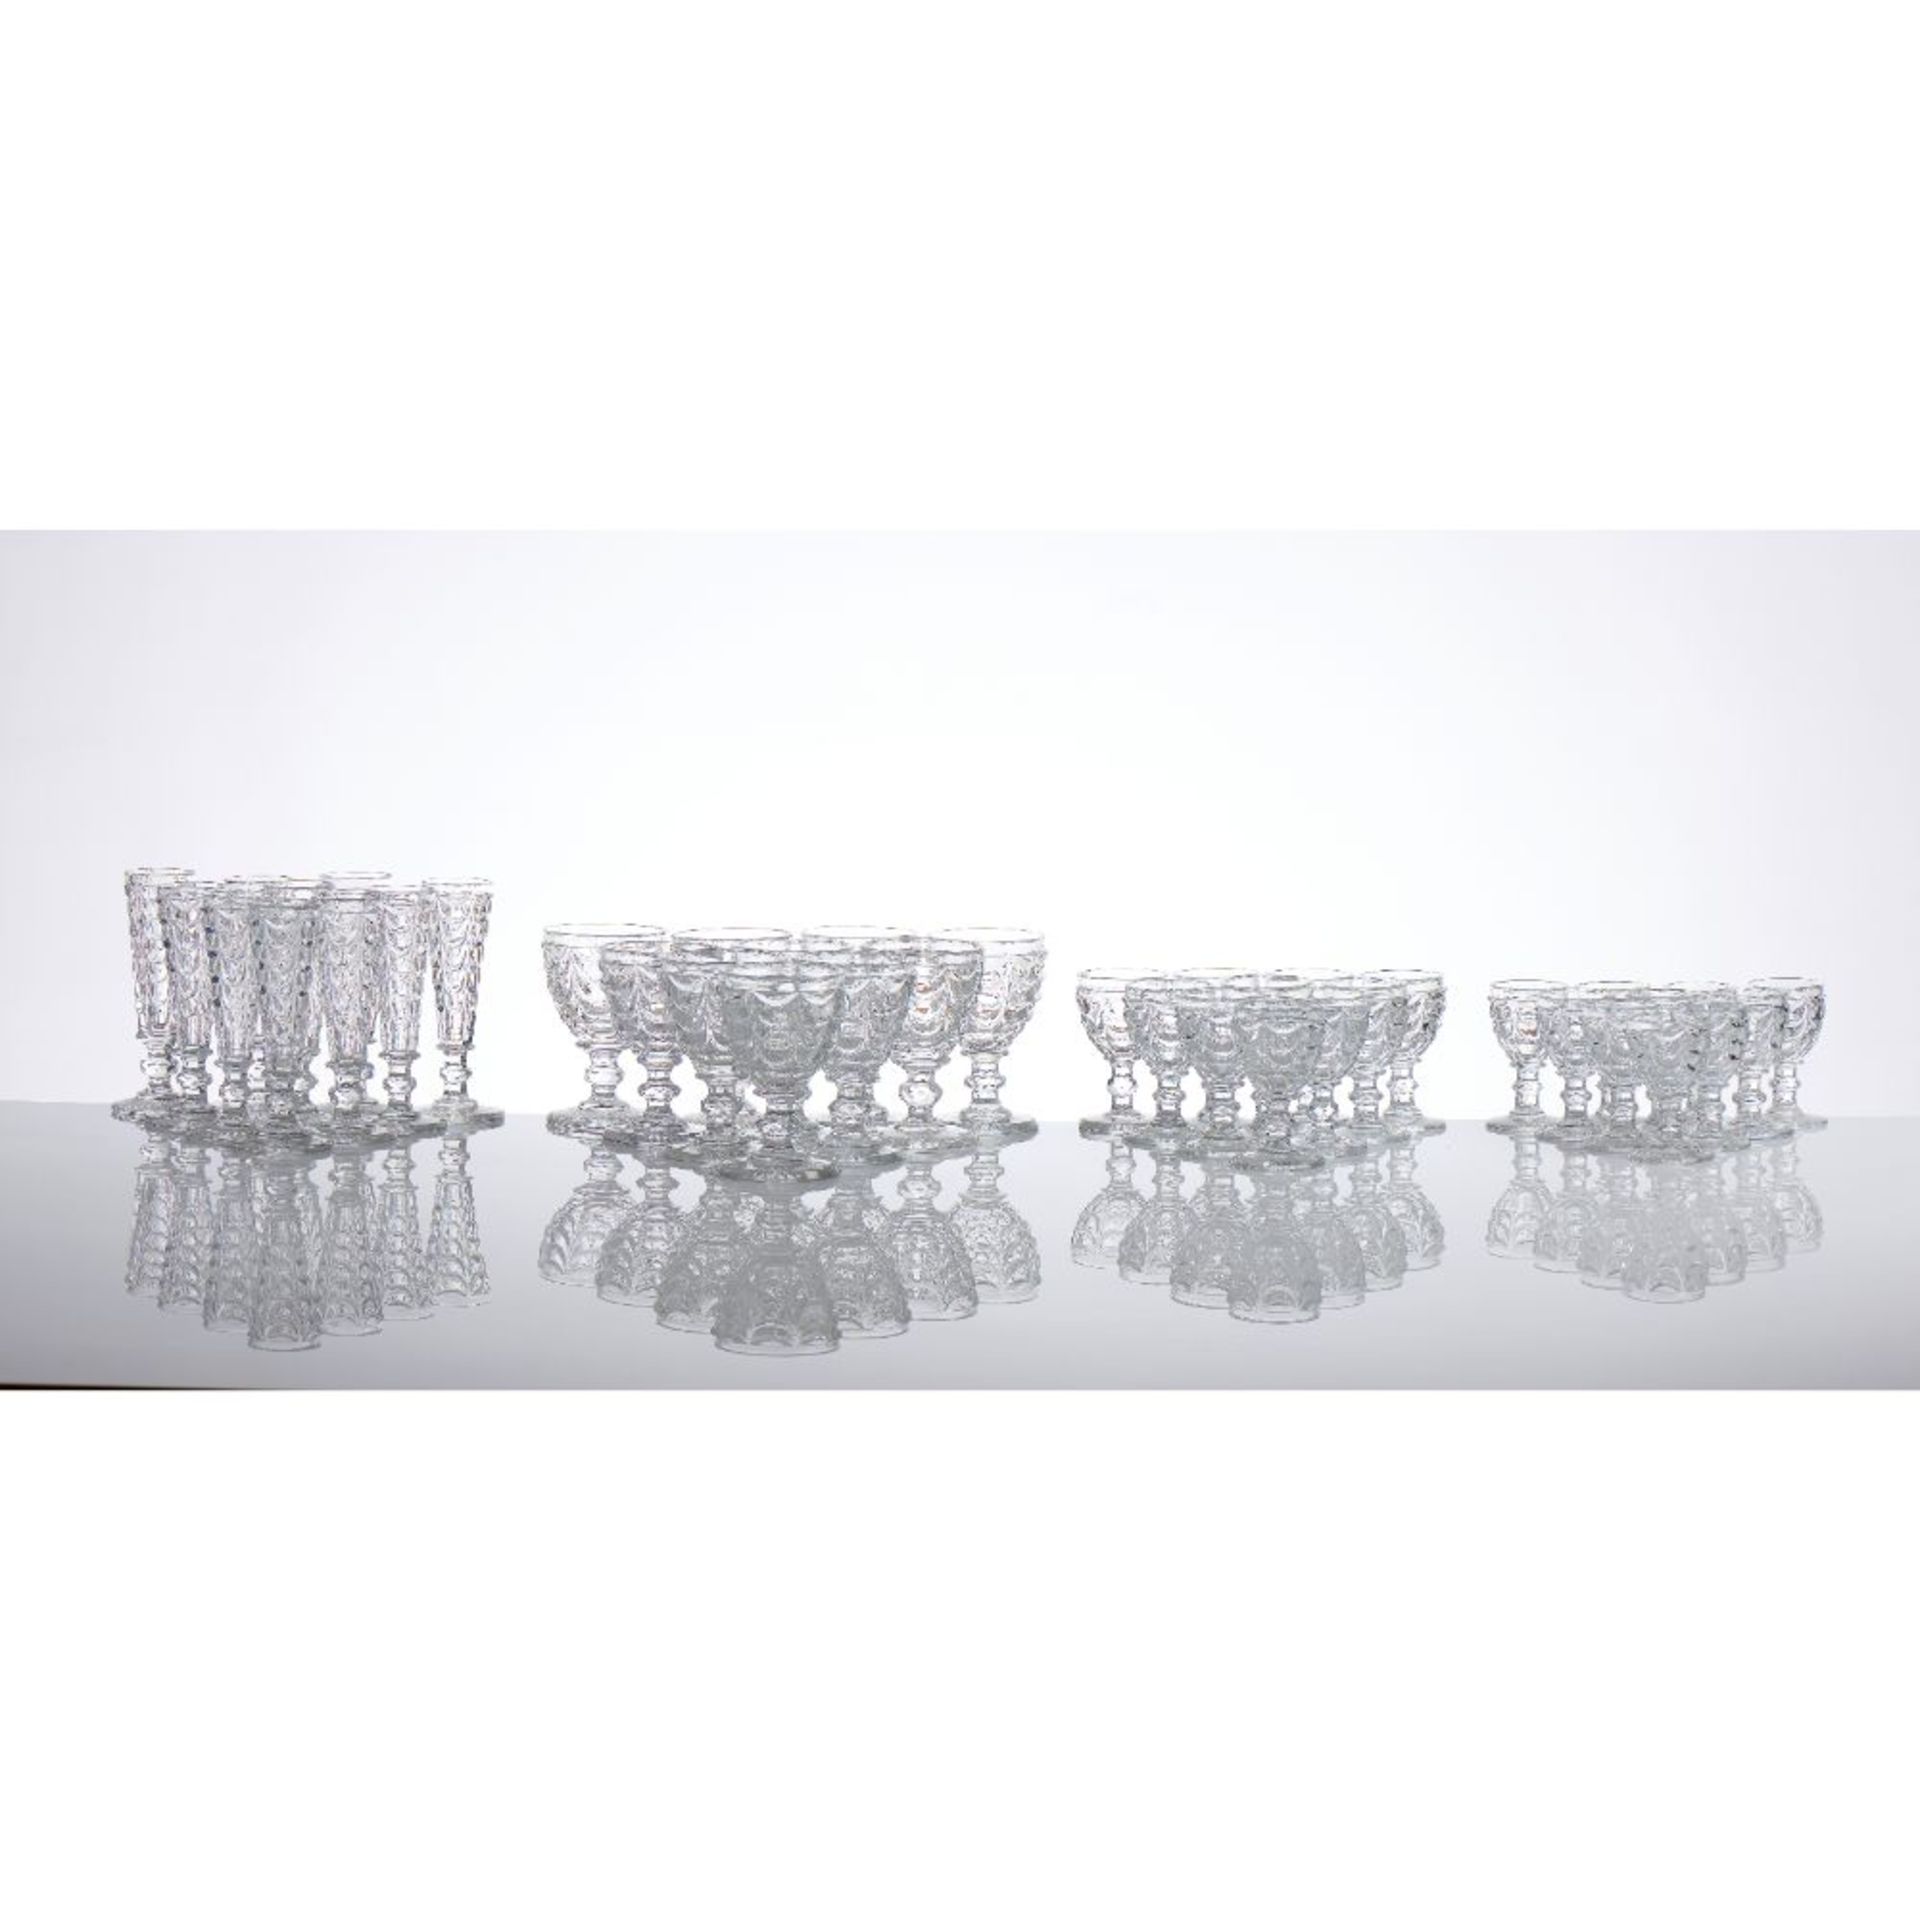 A set of Charles X drinking glasses for 10